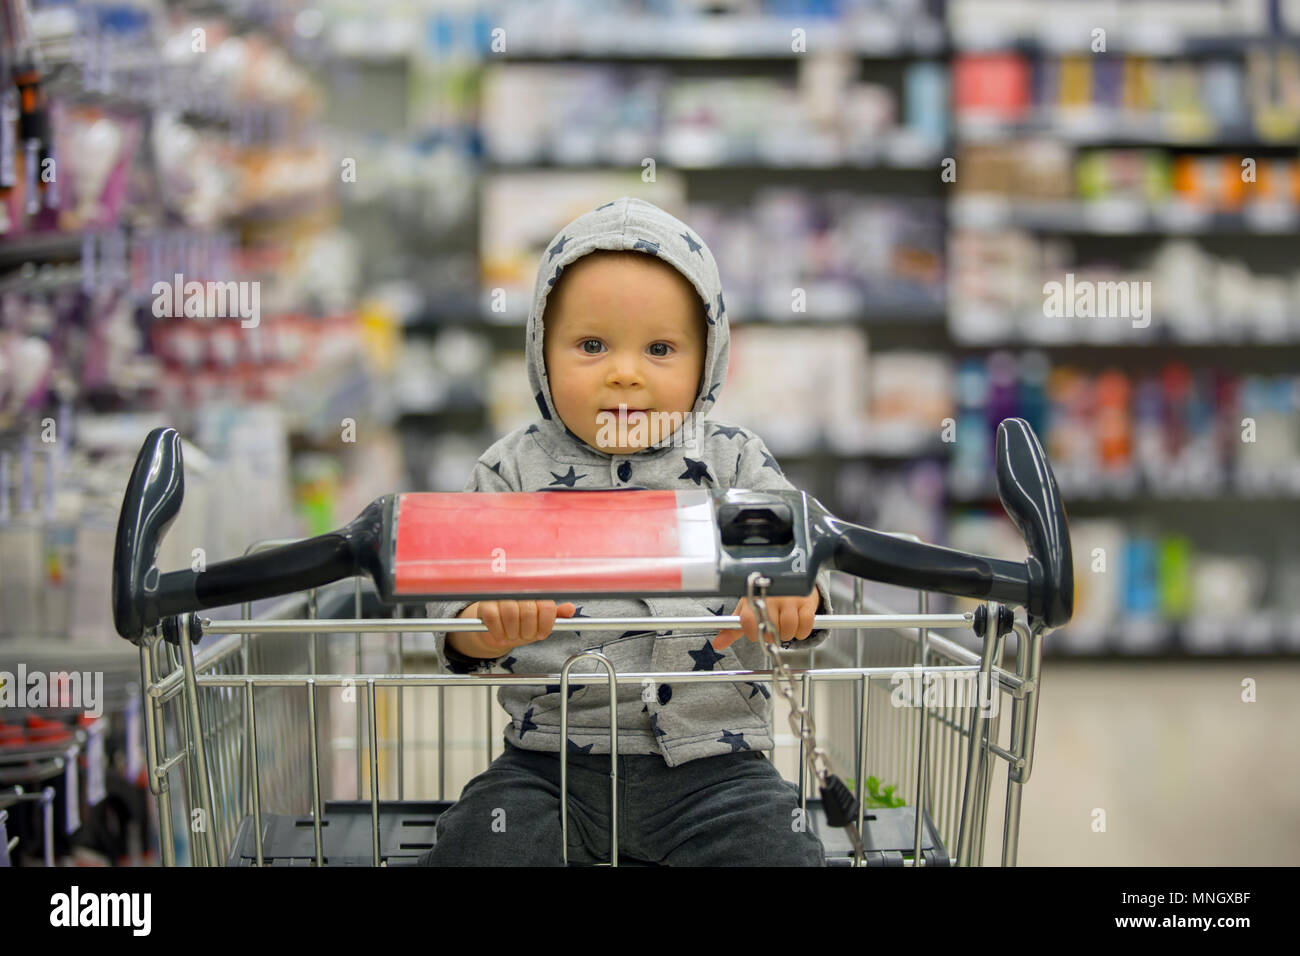 Toddler baby boy, sitting in a shopping cart in grocery store, smiling and  eating bread while mommy is shopping Stock Photo - Alamy